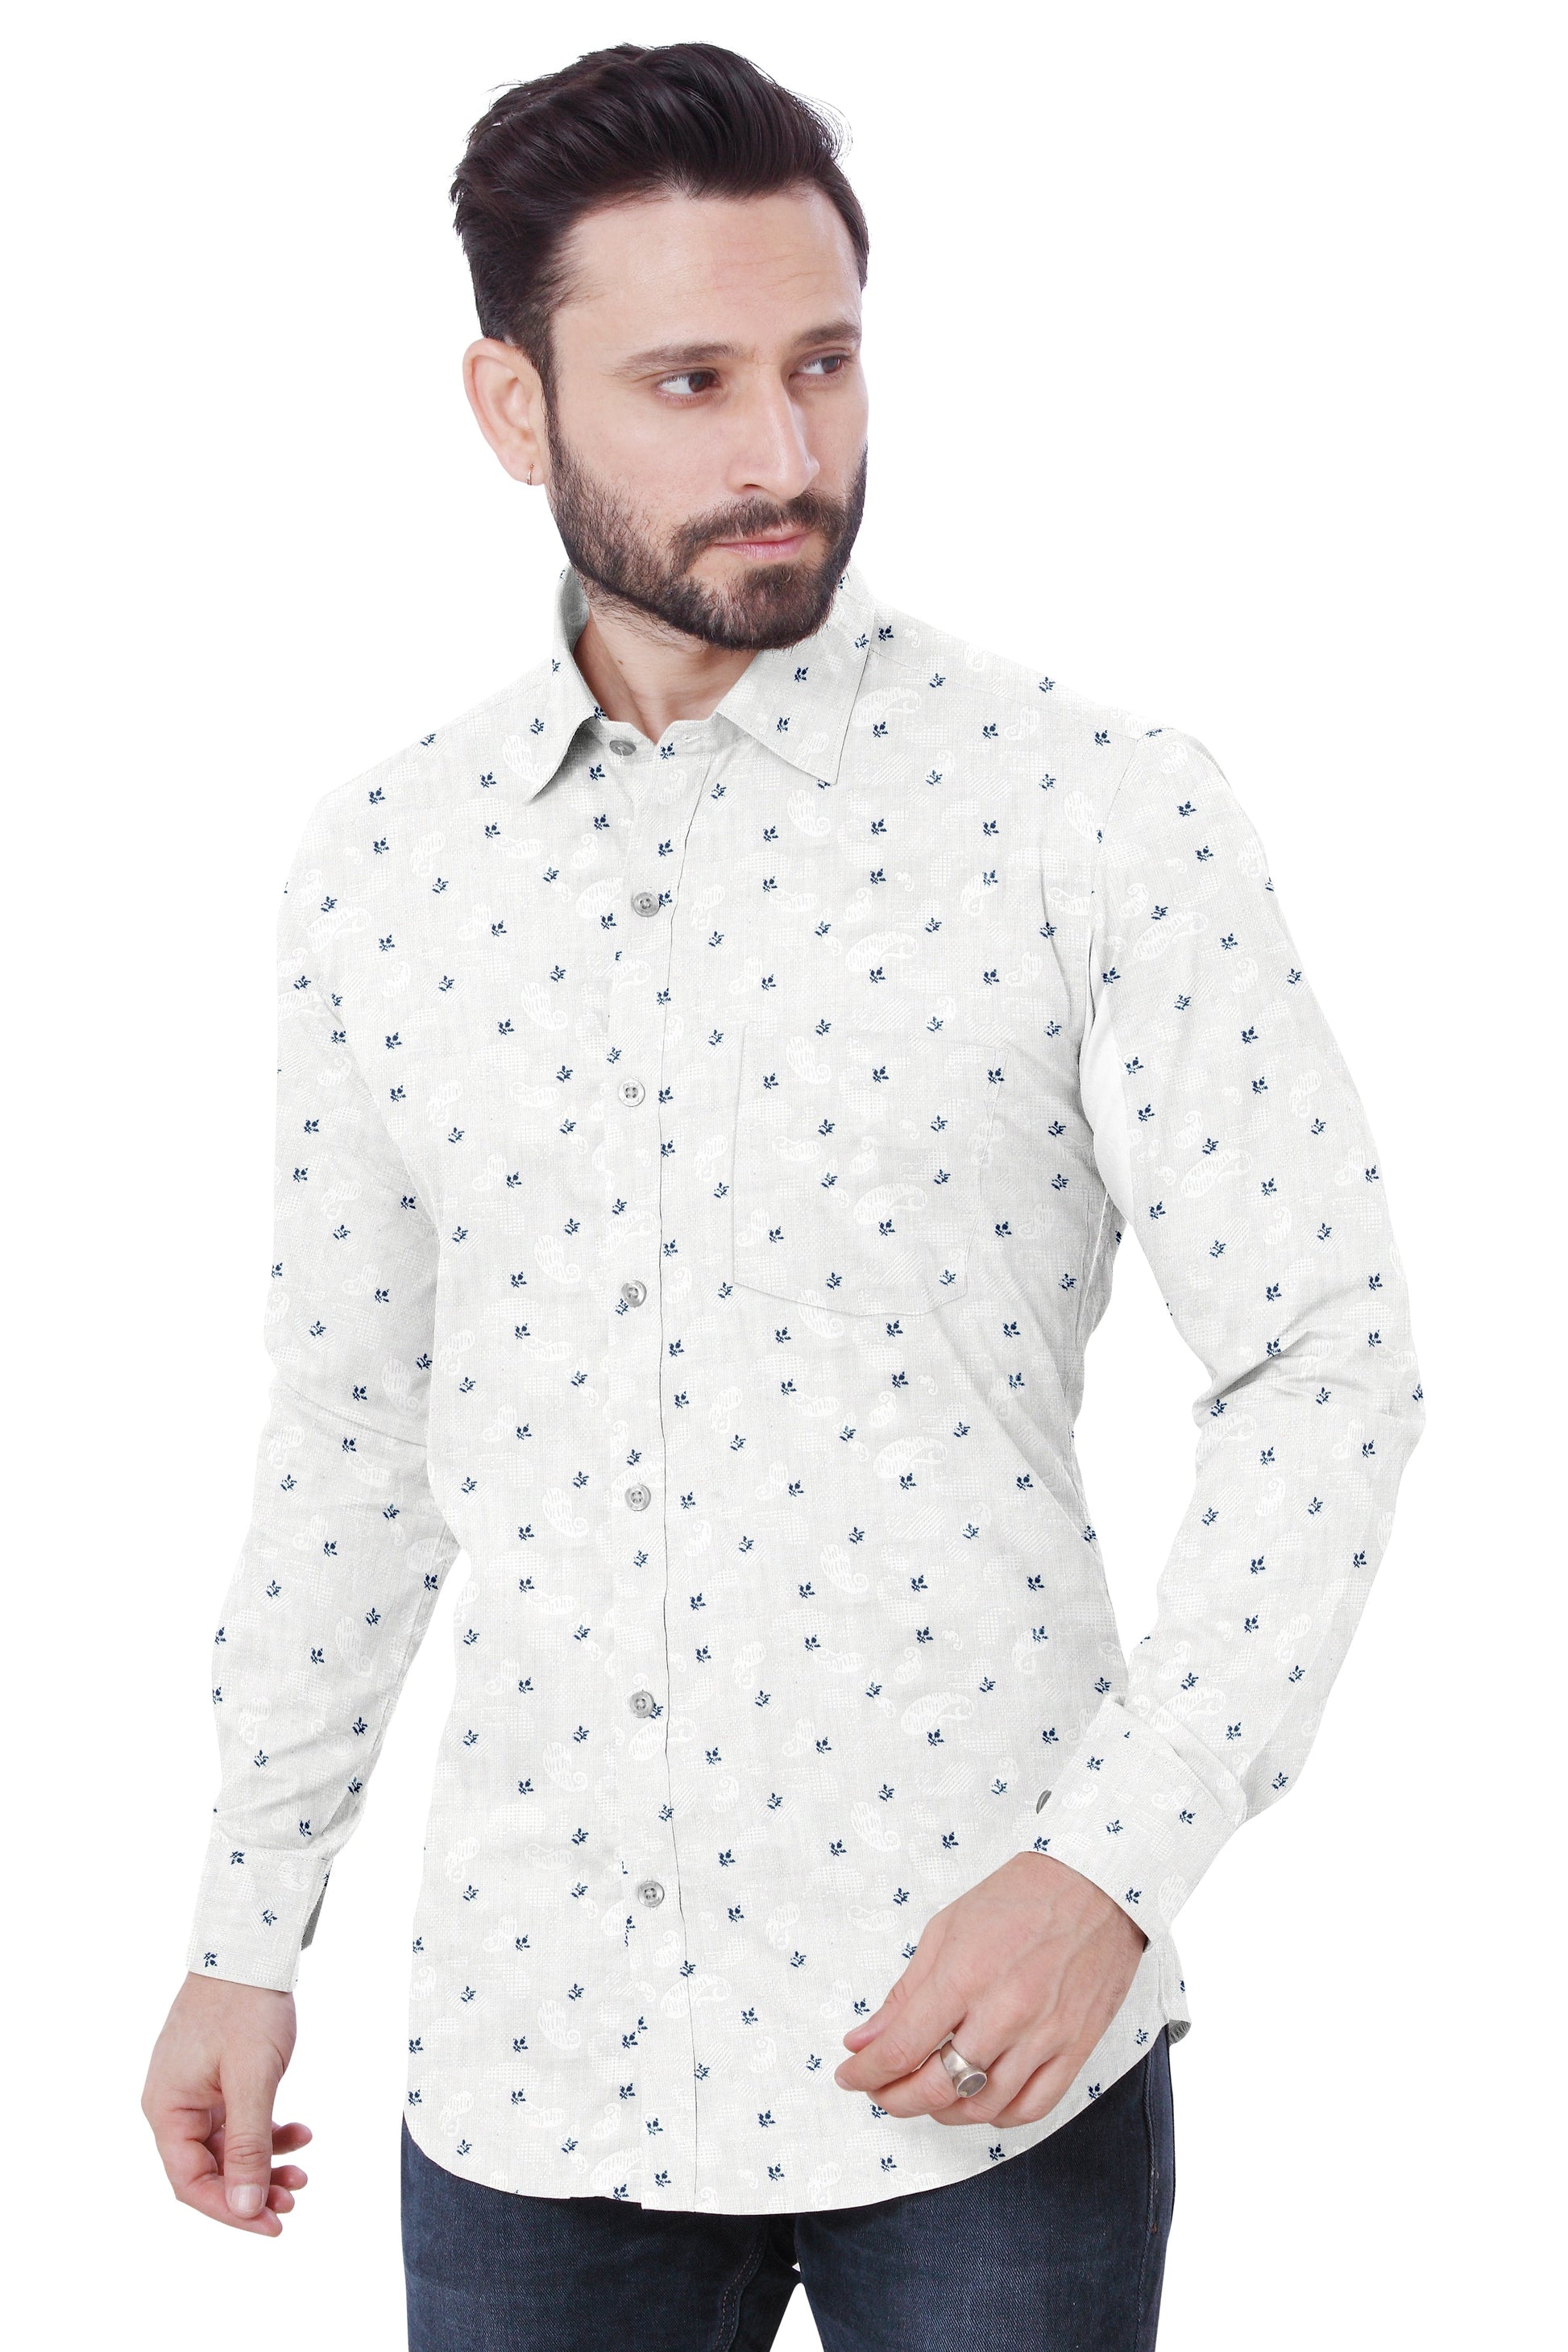 Men's White Printed Casual Shirt Full Sleeves 100% Cotton 